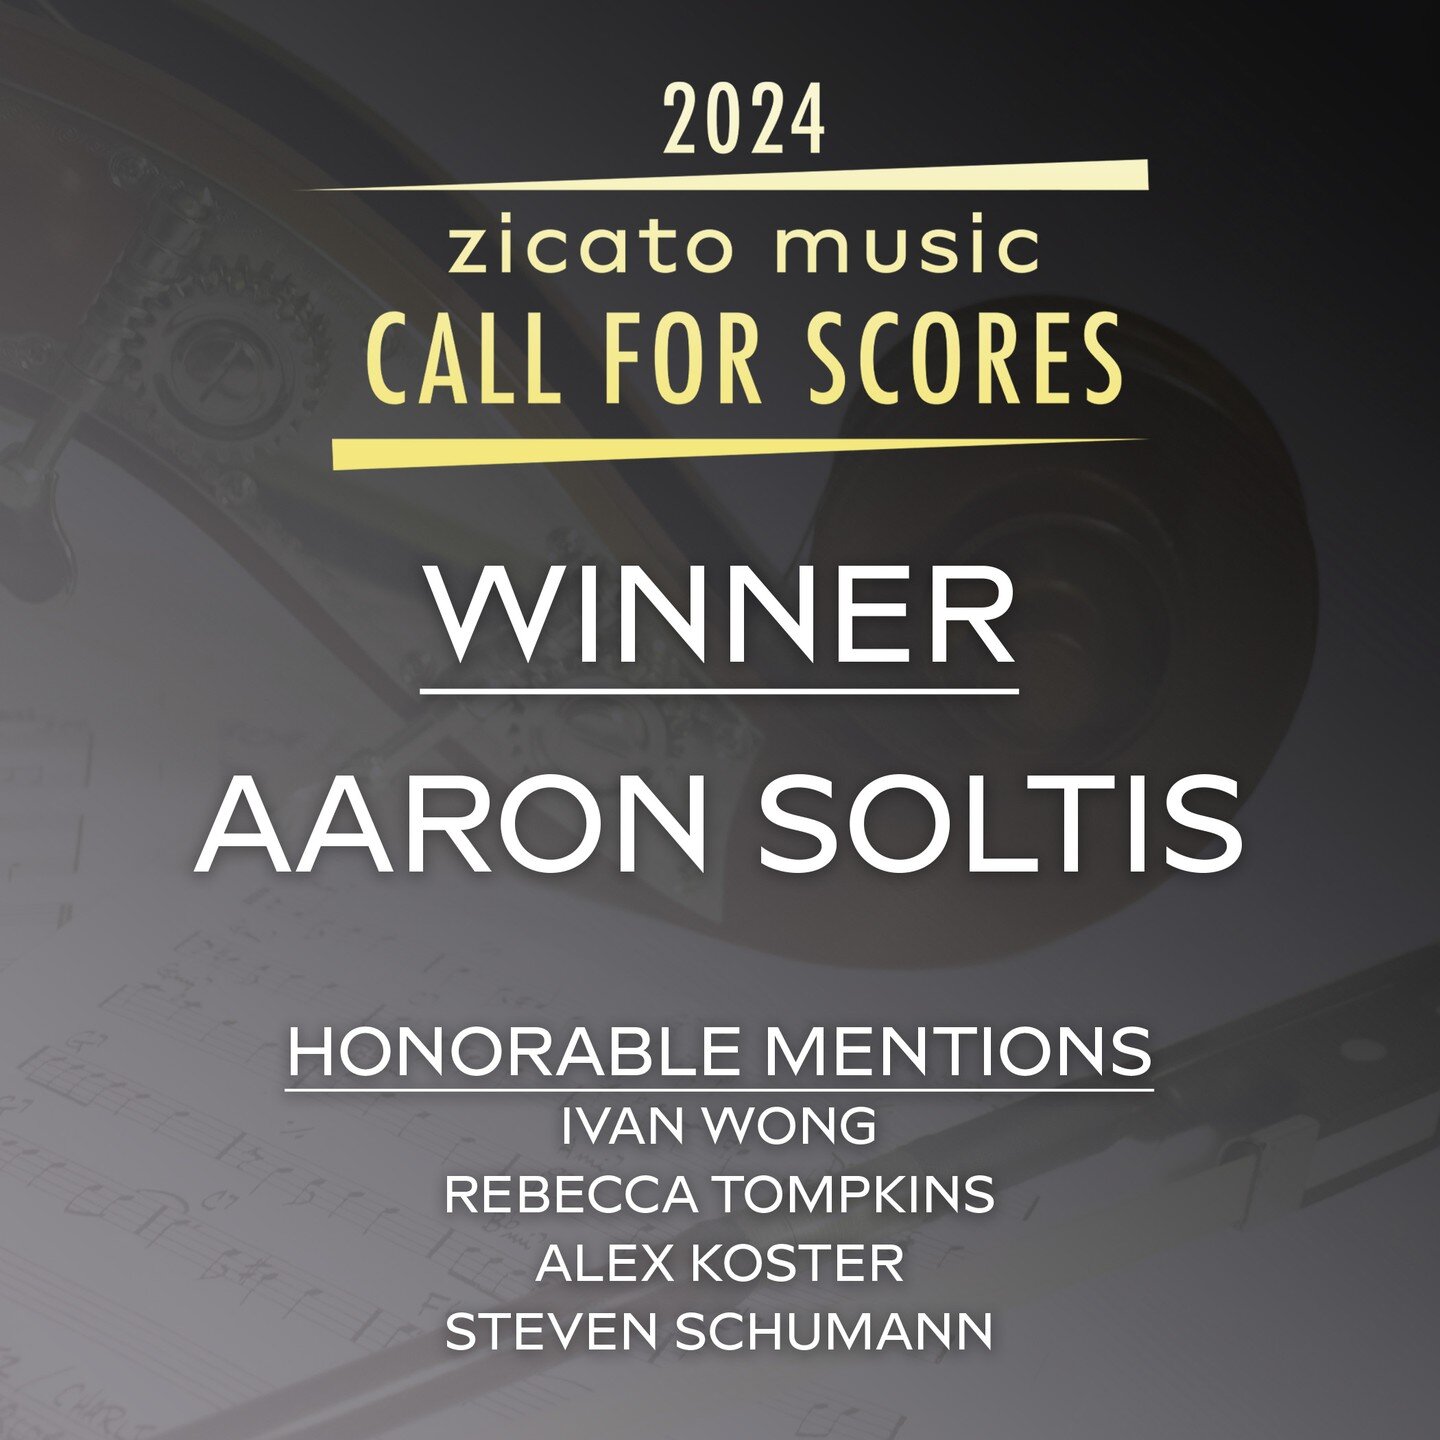 We are proud to announce that the 2024 Zicato Music Call for Scores winner is Aaron Soltis for his work The Odyssey of a Seafarer. Congratulations Aaron!
With so many terrific compositions, we would also like to recognize the following composers as h